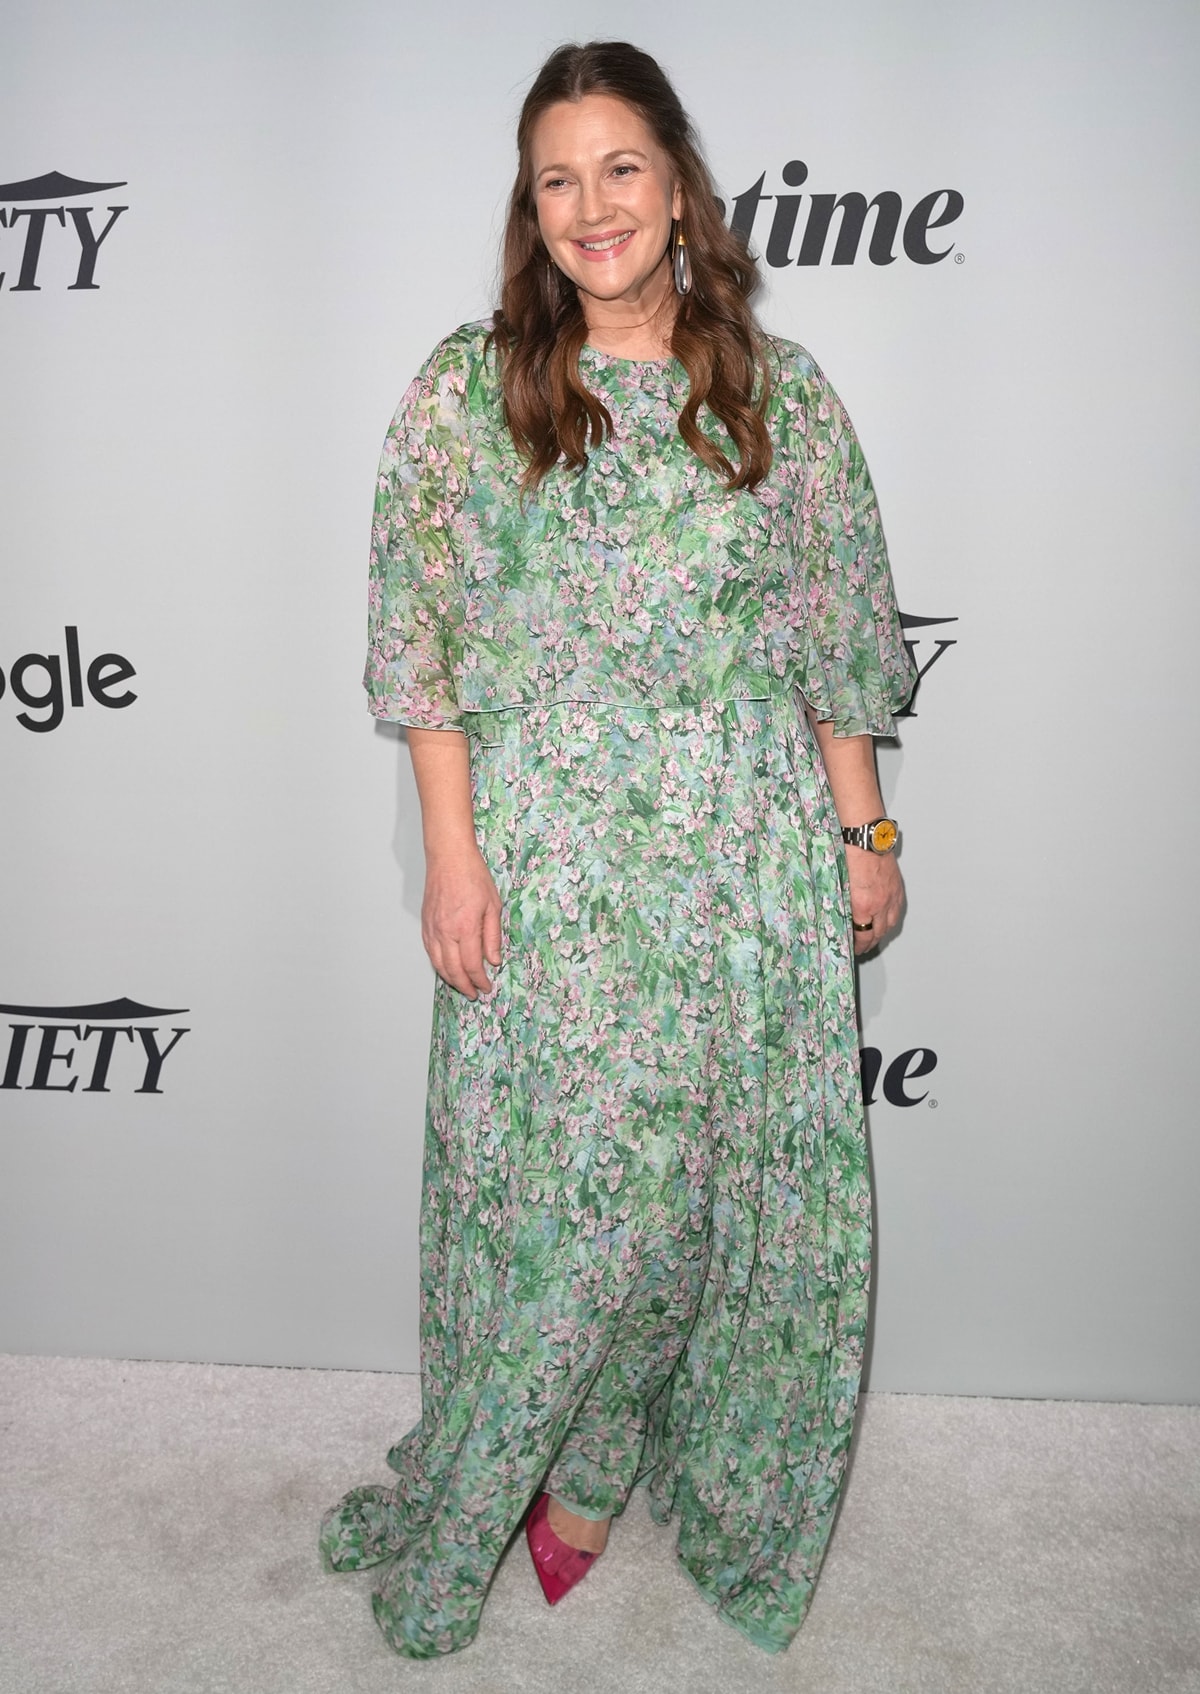 Drew Barrymore in a floral Giambattista Valli dress crafted of silk with flowy drape sleeves for Variety’s 2022 Power Of Women event